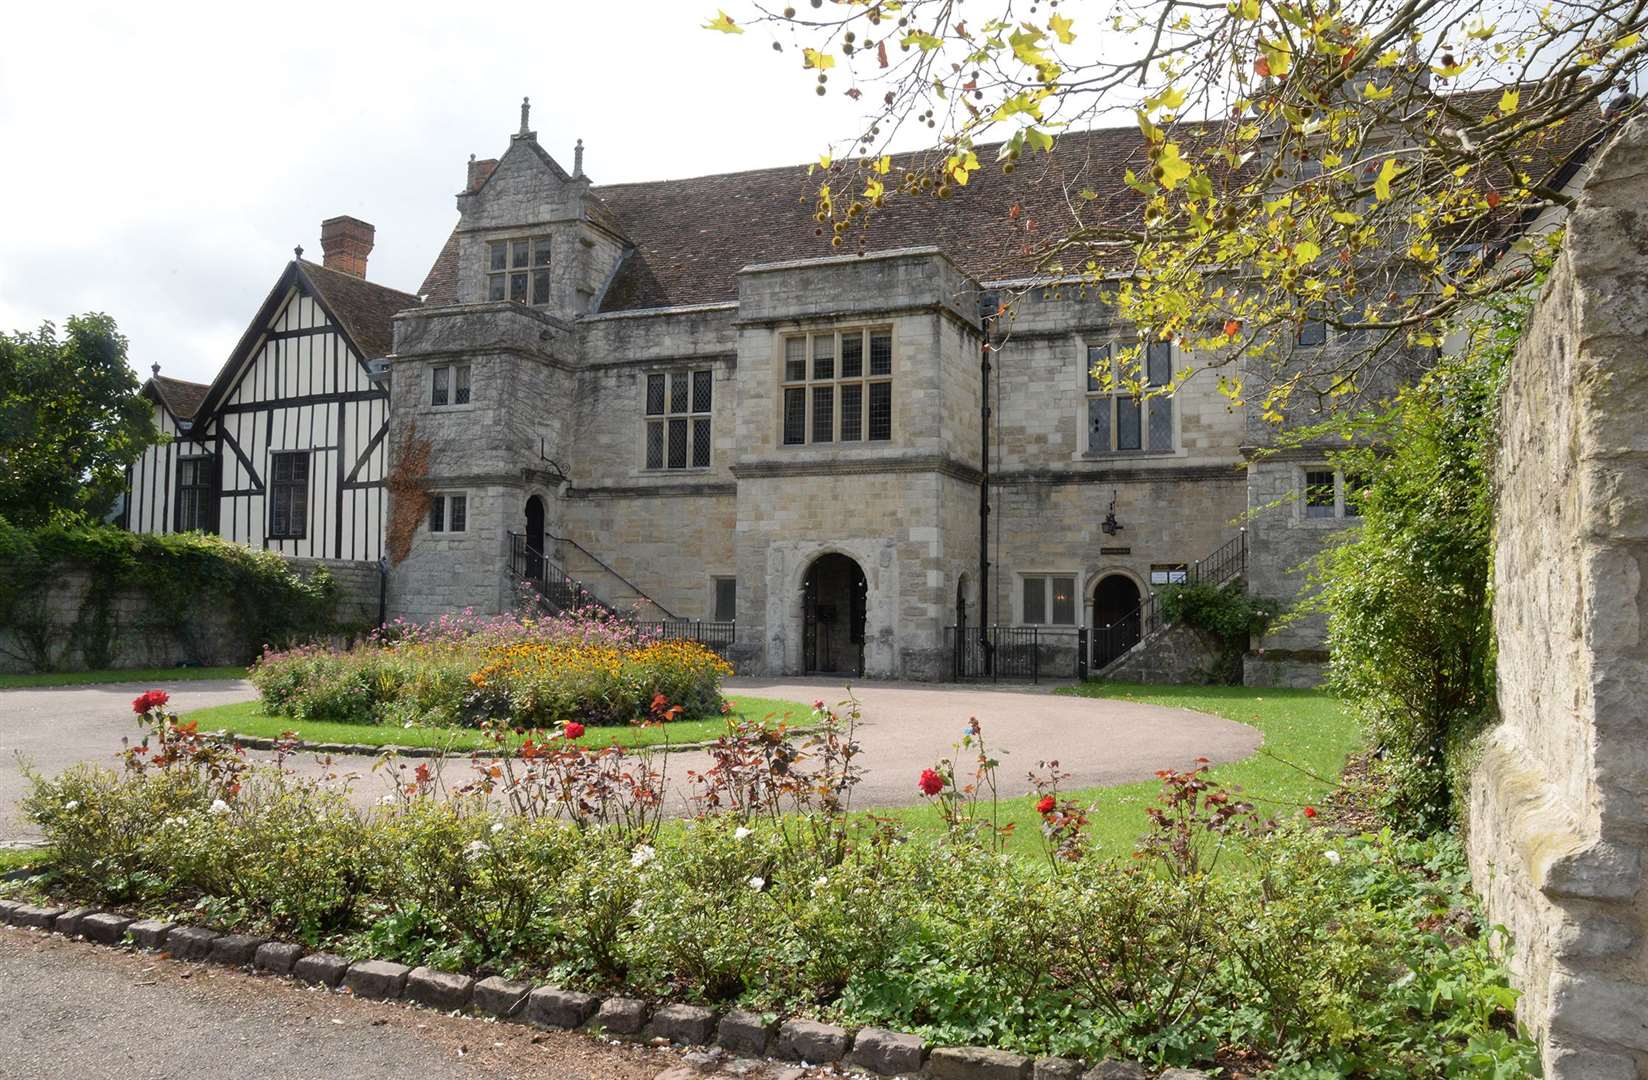 The Archbishops Palace in Maidstone